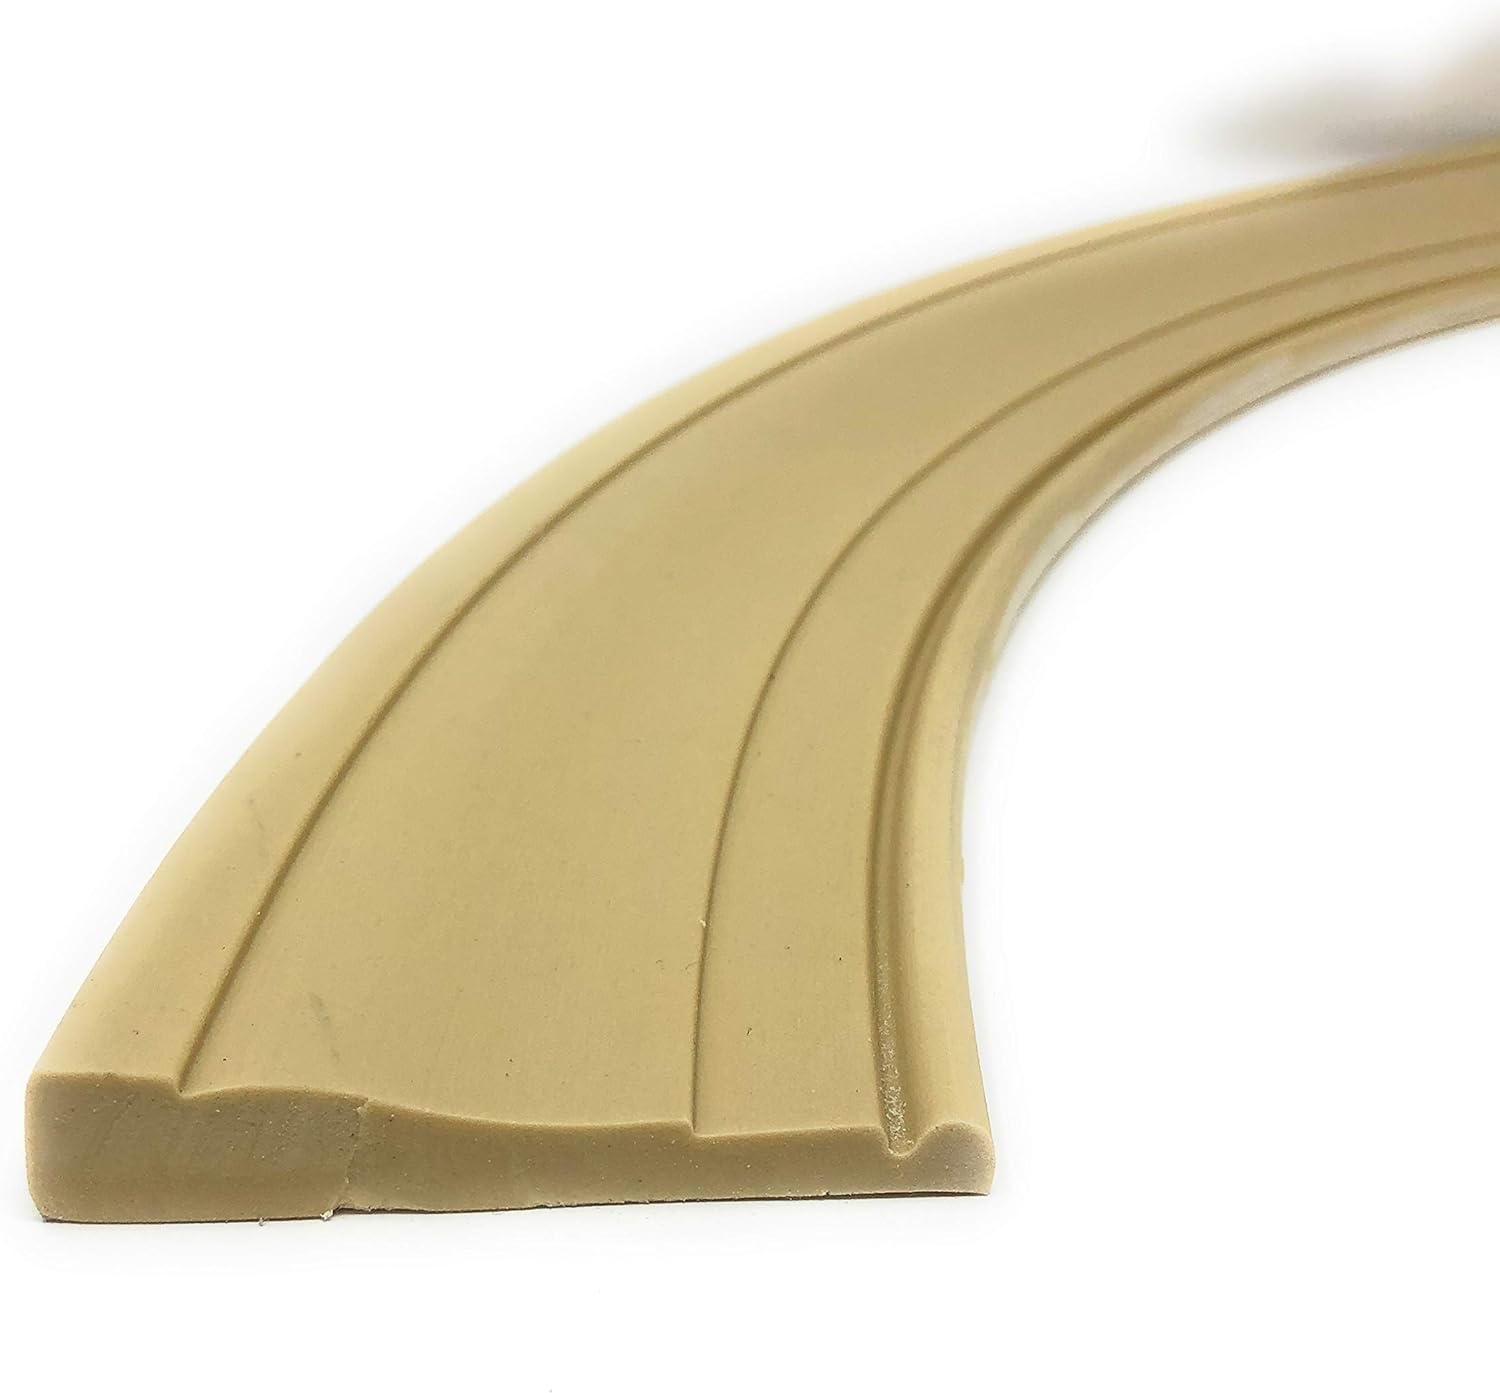 FLEXTRIM #445: Flexible Casing Molding: 11/16" Thick x 3.25" Wide - PRE Curved to fit Half Round Windows 42" to 56"